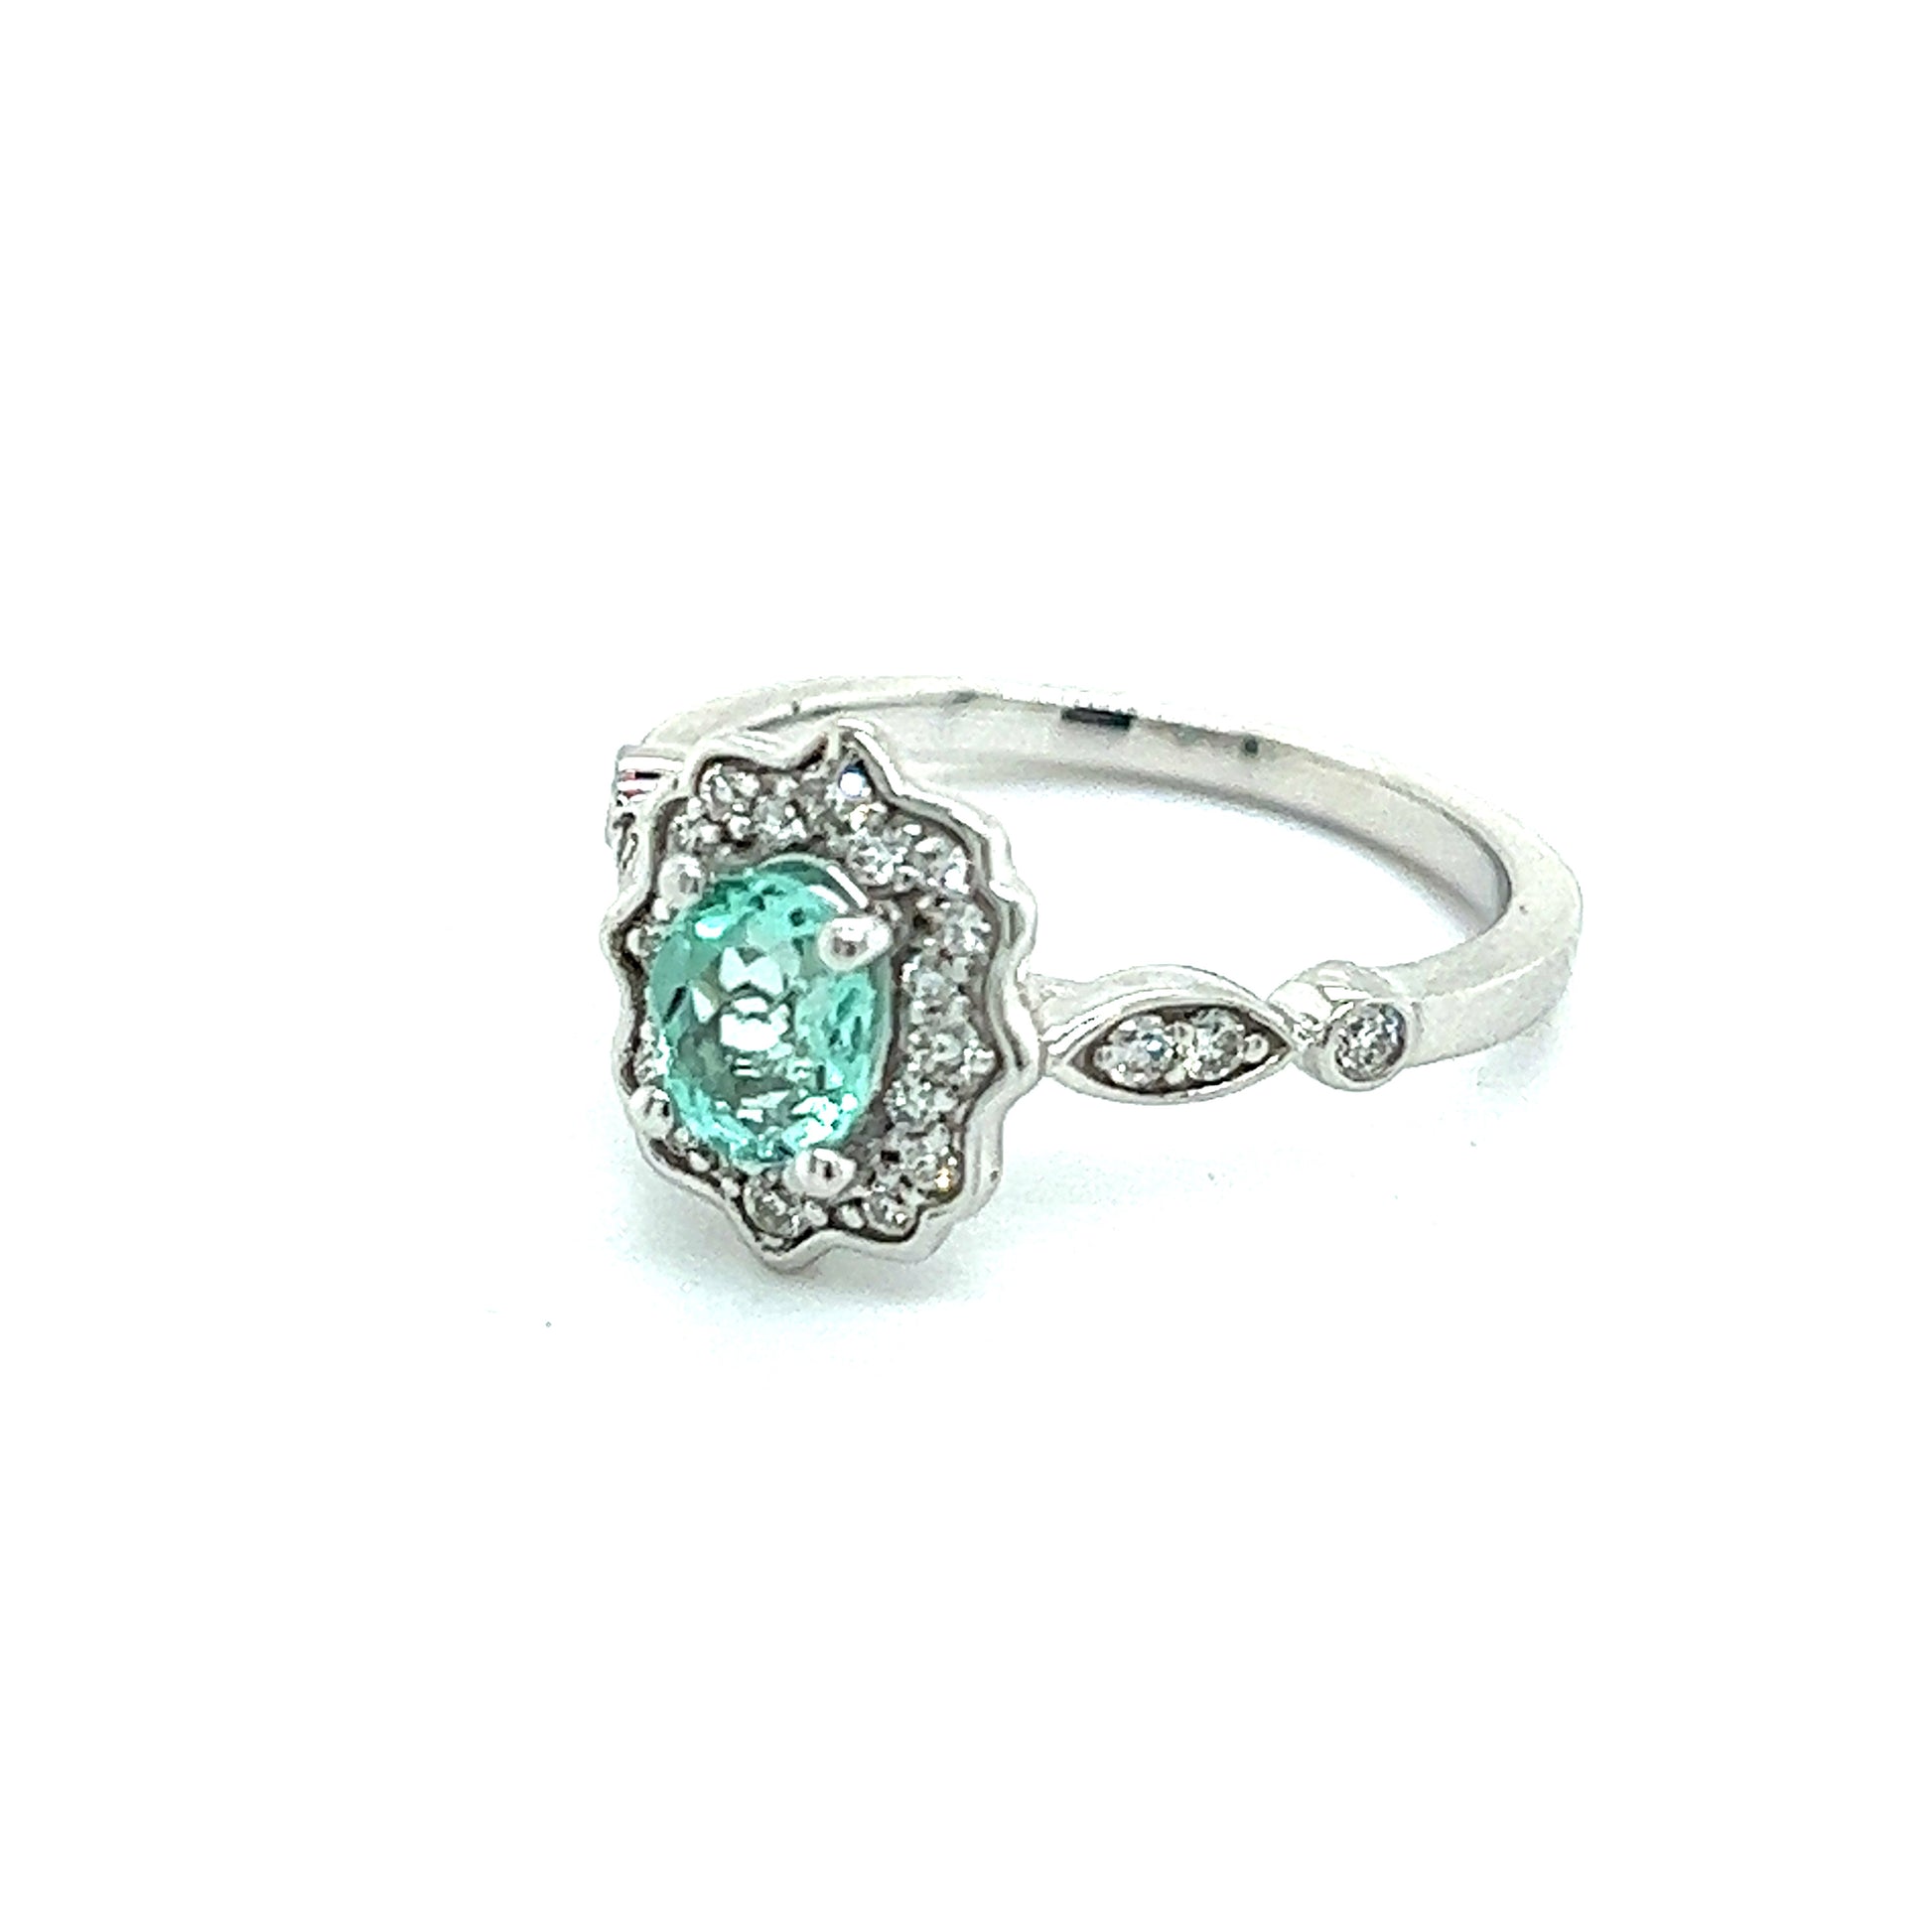 Natural Colombian Emerald Diamond Ring Size 6.5 14k W Gold 0.80 TCW Certified $4,750 216667 - Certified Fine Jewelry